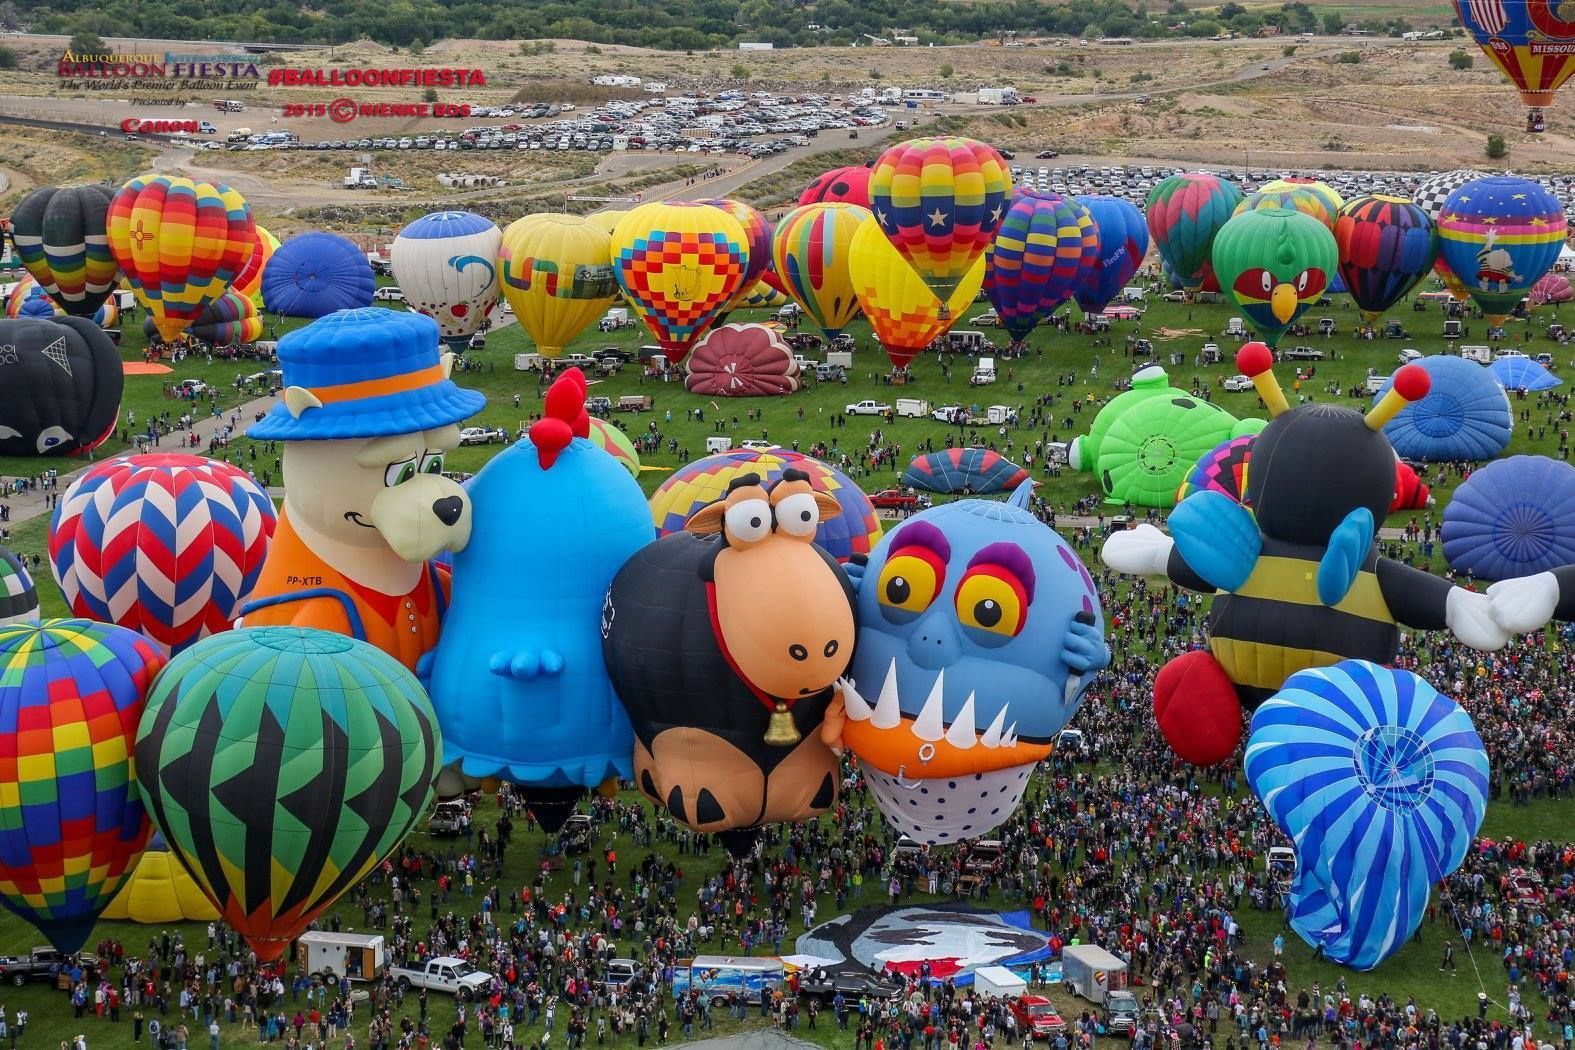 World's Largest Hot Air Balloon Festival, world record in Albuquerque, New Mexico